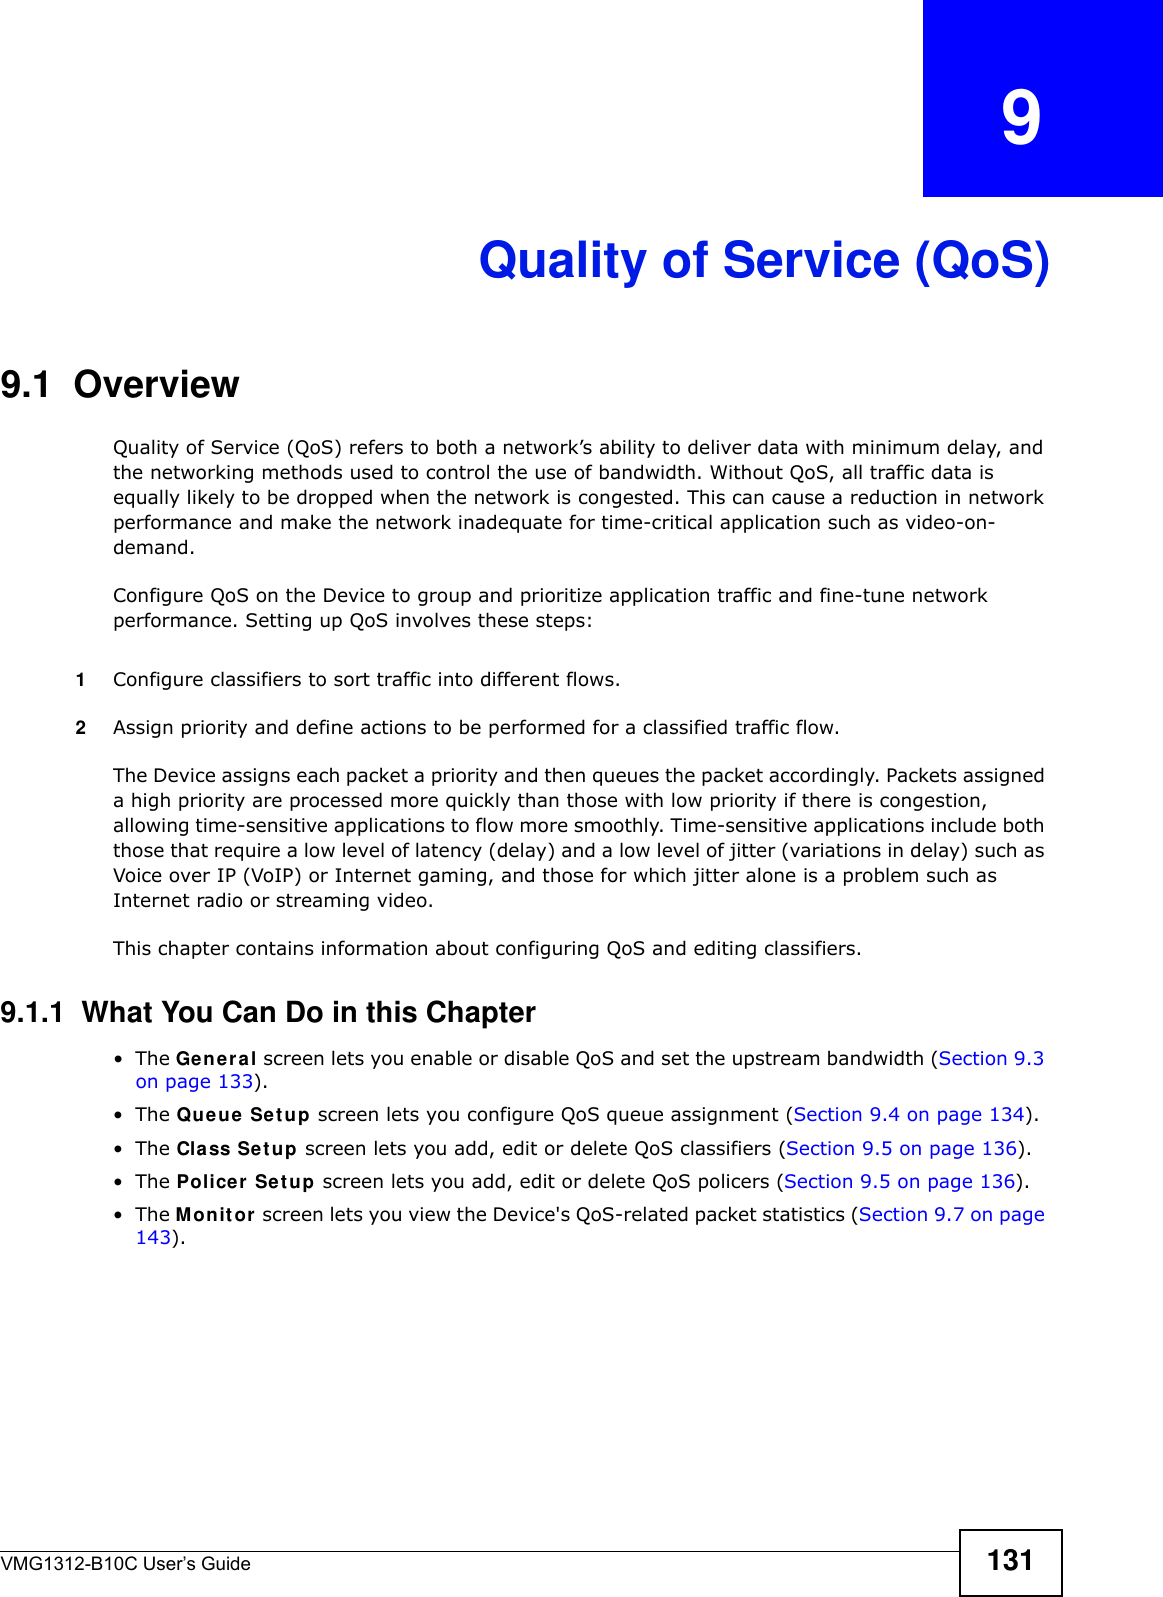 VMG1312-B10C User’s Guide 131CHAPTER   9Quality of Service (QoS)9.1  Overview Quality of Service (QoS) refers to both a network’s ability to deliver data with minimum delay, and the networking methods used to control the use of bandwidth. Without QoS, all traffic data is equally likely to be dropped when the network is congested. This can cause a reduction in network performance and make the network inadequate for time-critical application such as video-on-demand.Configure QoS on the Device to group and prioritize application traffic and fine-tune network performance. Setting up QoS involves these steps:1Configure classifiers to sort traffic into different flows. 2Assign priority and define actions to be performed for a classified traffic flow. The Device assigns each packet a priority and then queues the packet accordingly. Packets assigned a high priority are processed more quickly than those with low priority if there is congestion, allowing time-sensitive applications to flow more smoothly. Time-sensitive applications include both those that require a low level of latency (delay) and a low level of jitter (variations in delay) such as Voice over IP (VoIP) or Internet gaming, and those for which jitter alone is a problem such as Internet radio or streaming video.This chapter contains information about configuring QoS and editing classifiers.9.1.1  What You Can Do in this Chapter•The Gen e r a l screen lets you enable or disable QoS and set the upstream bandwidth (Section 9.3 on page 133).•The Qu e ue Set up screen lets you configure QoS queue assignment (Section 9.4 on page 134).•The Class Se t u p screen lets you add, edit or delete QoS classifiers (Section 9.5 on page 136).•The Policer Set u p screen lets you add, edit or delete QoS policers (Section 9.5 on page 136).•The M on it or  screen lets you view the Device&apos;s QoS-related packet statistics (Section 9.7 on page 143).